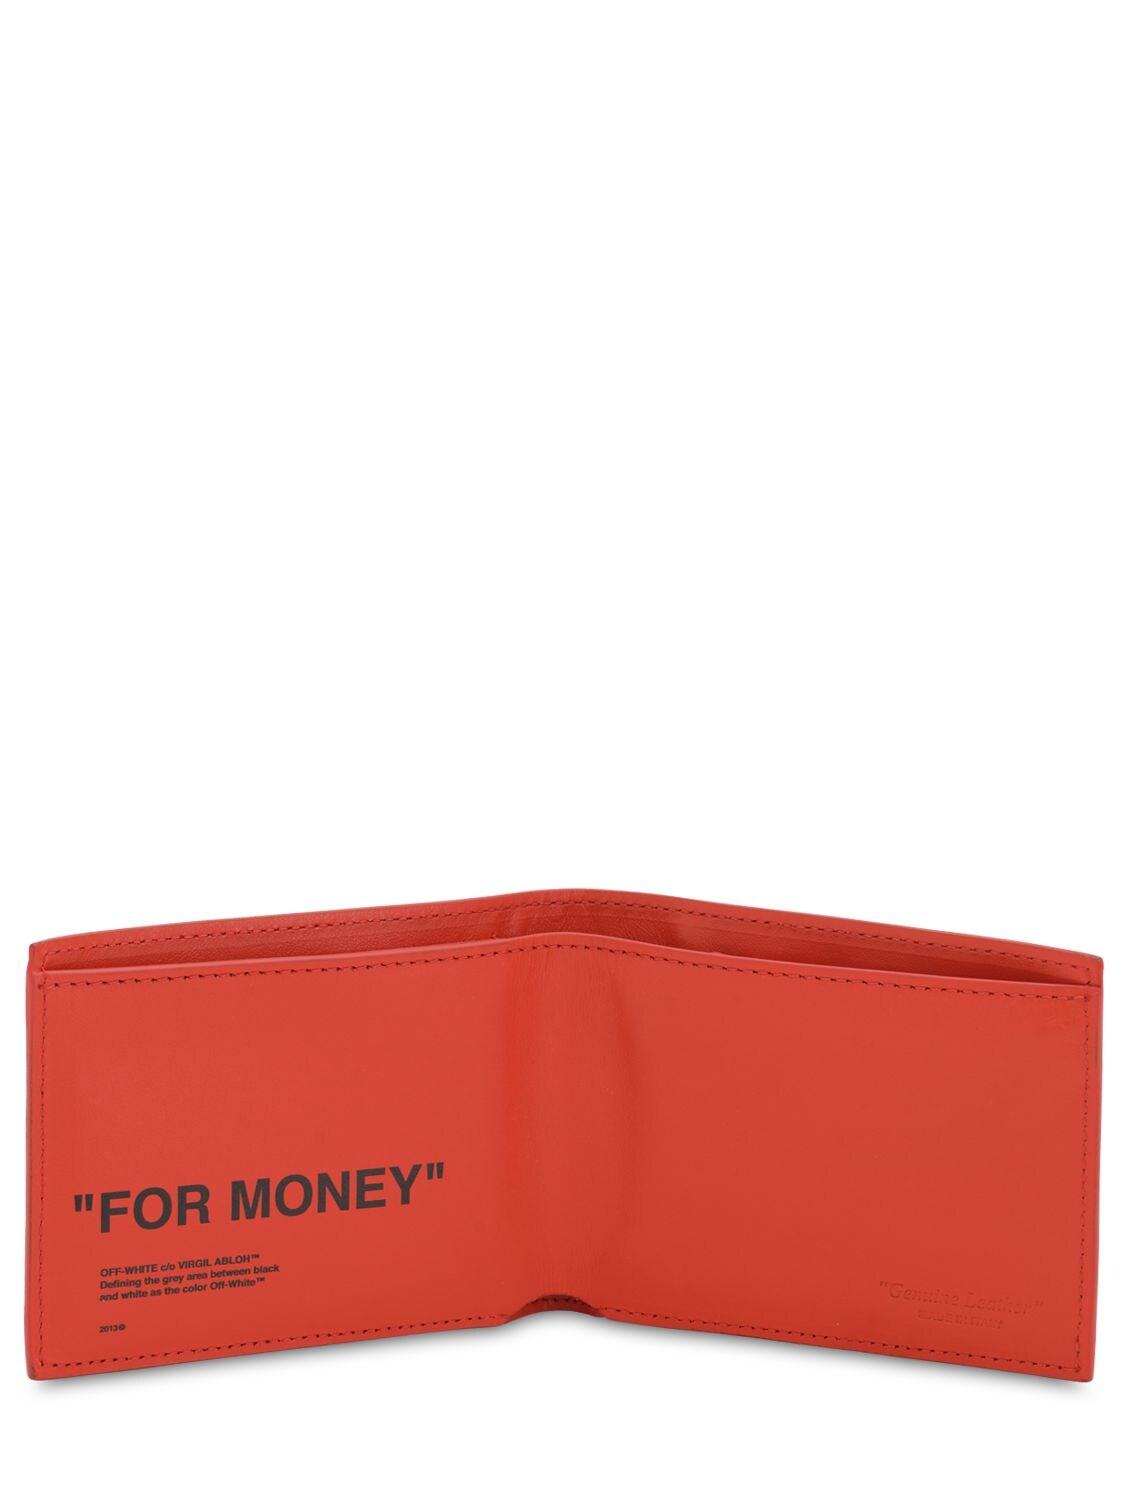 OFF-WHITE Quote Wallet FOR MONEY Orange Black in Leather - US